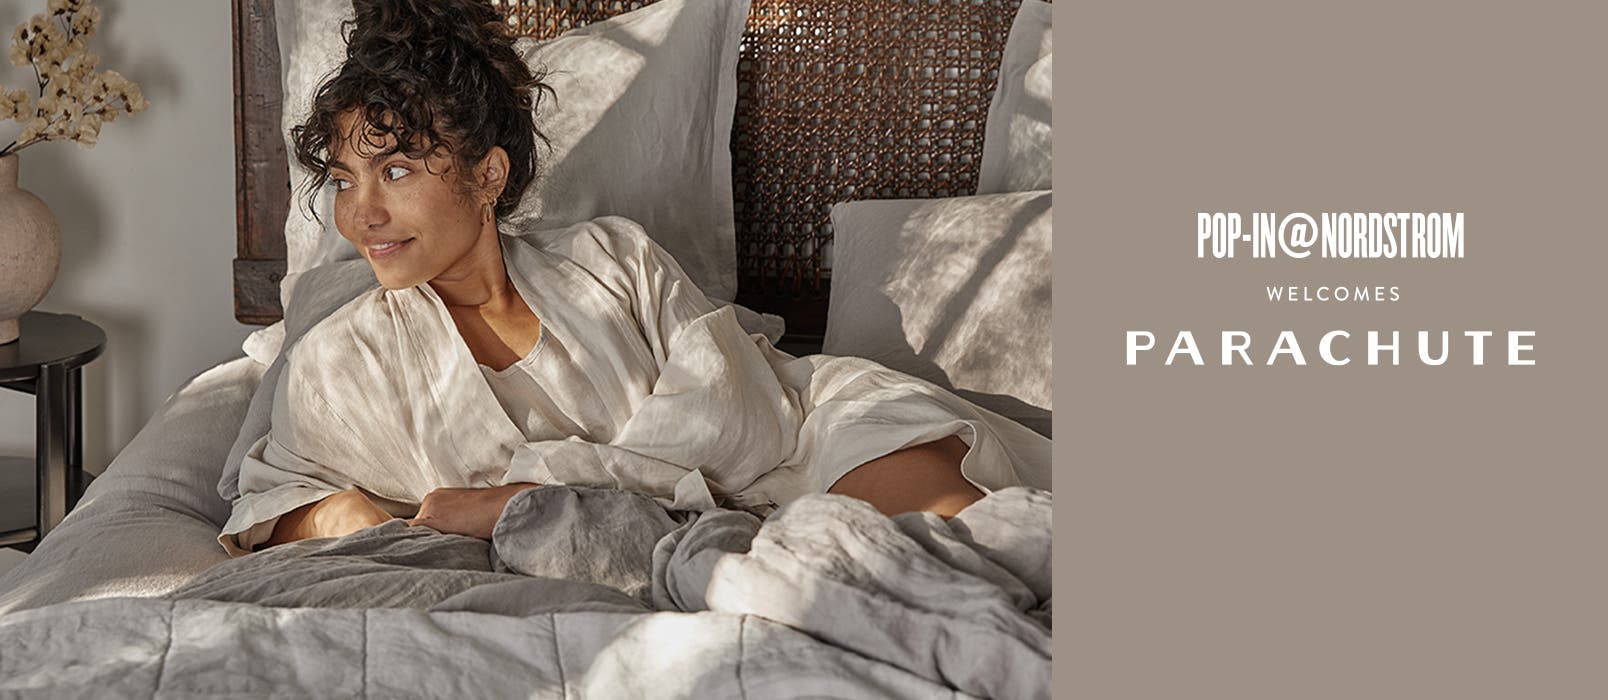 Pop-In@Nordstrom Welcomes Parachute: a woman on a bed made with Parachute bedding.